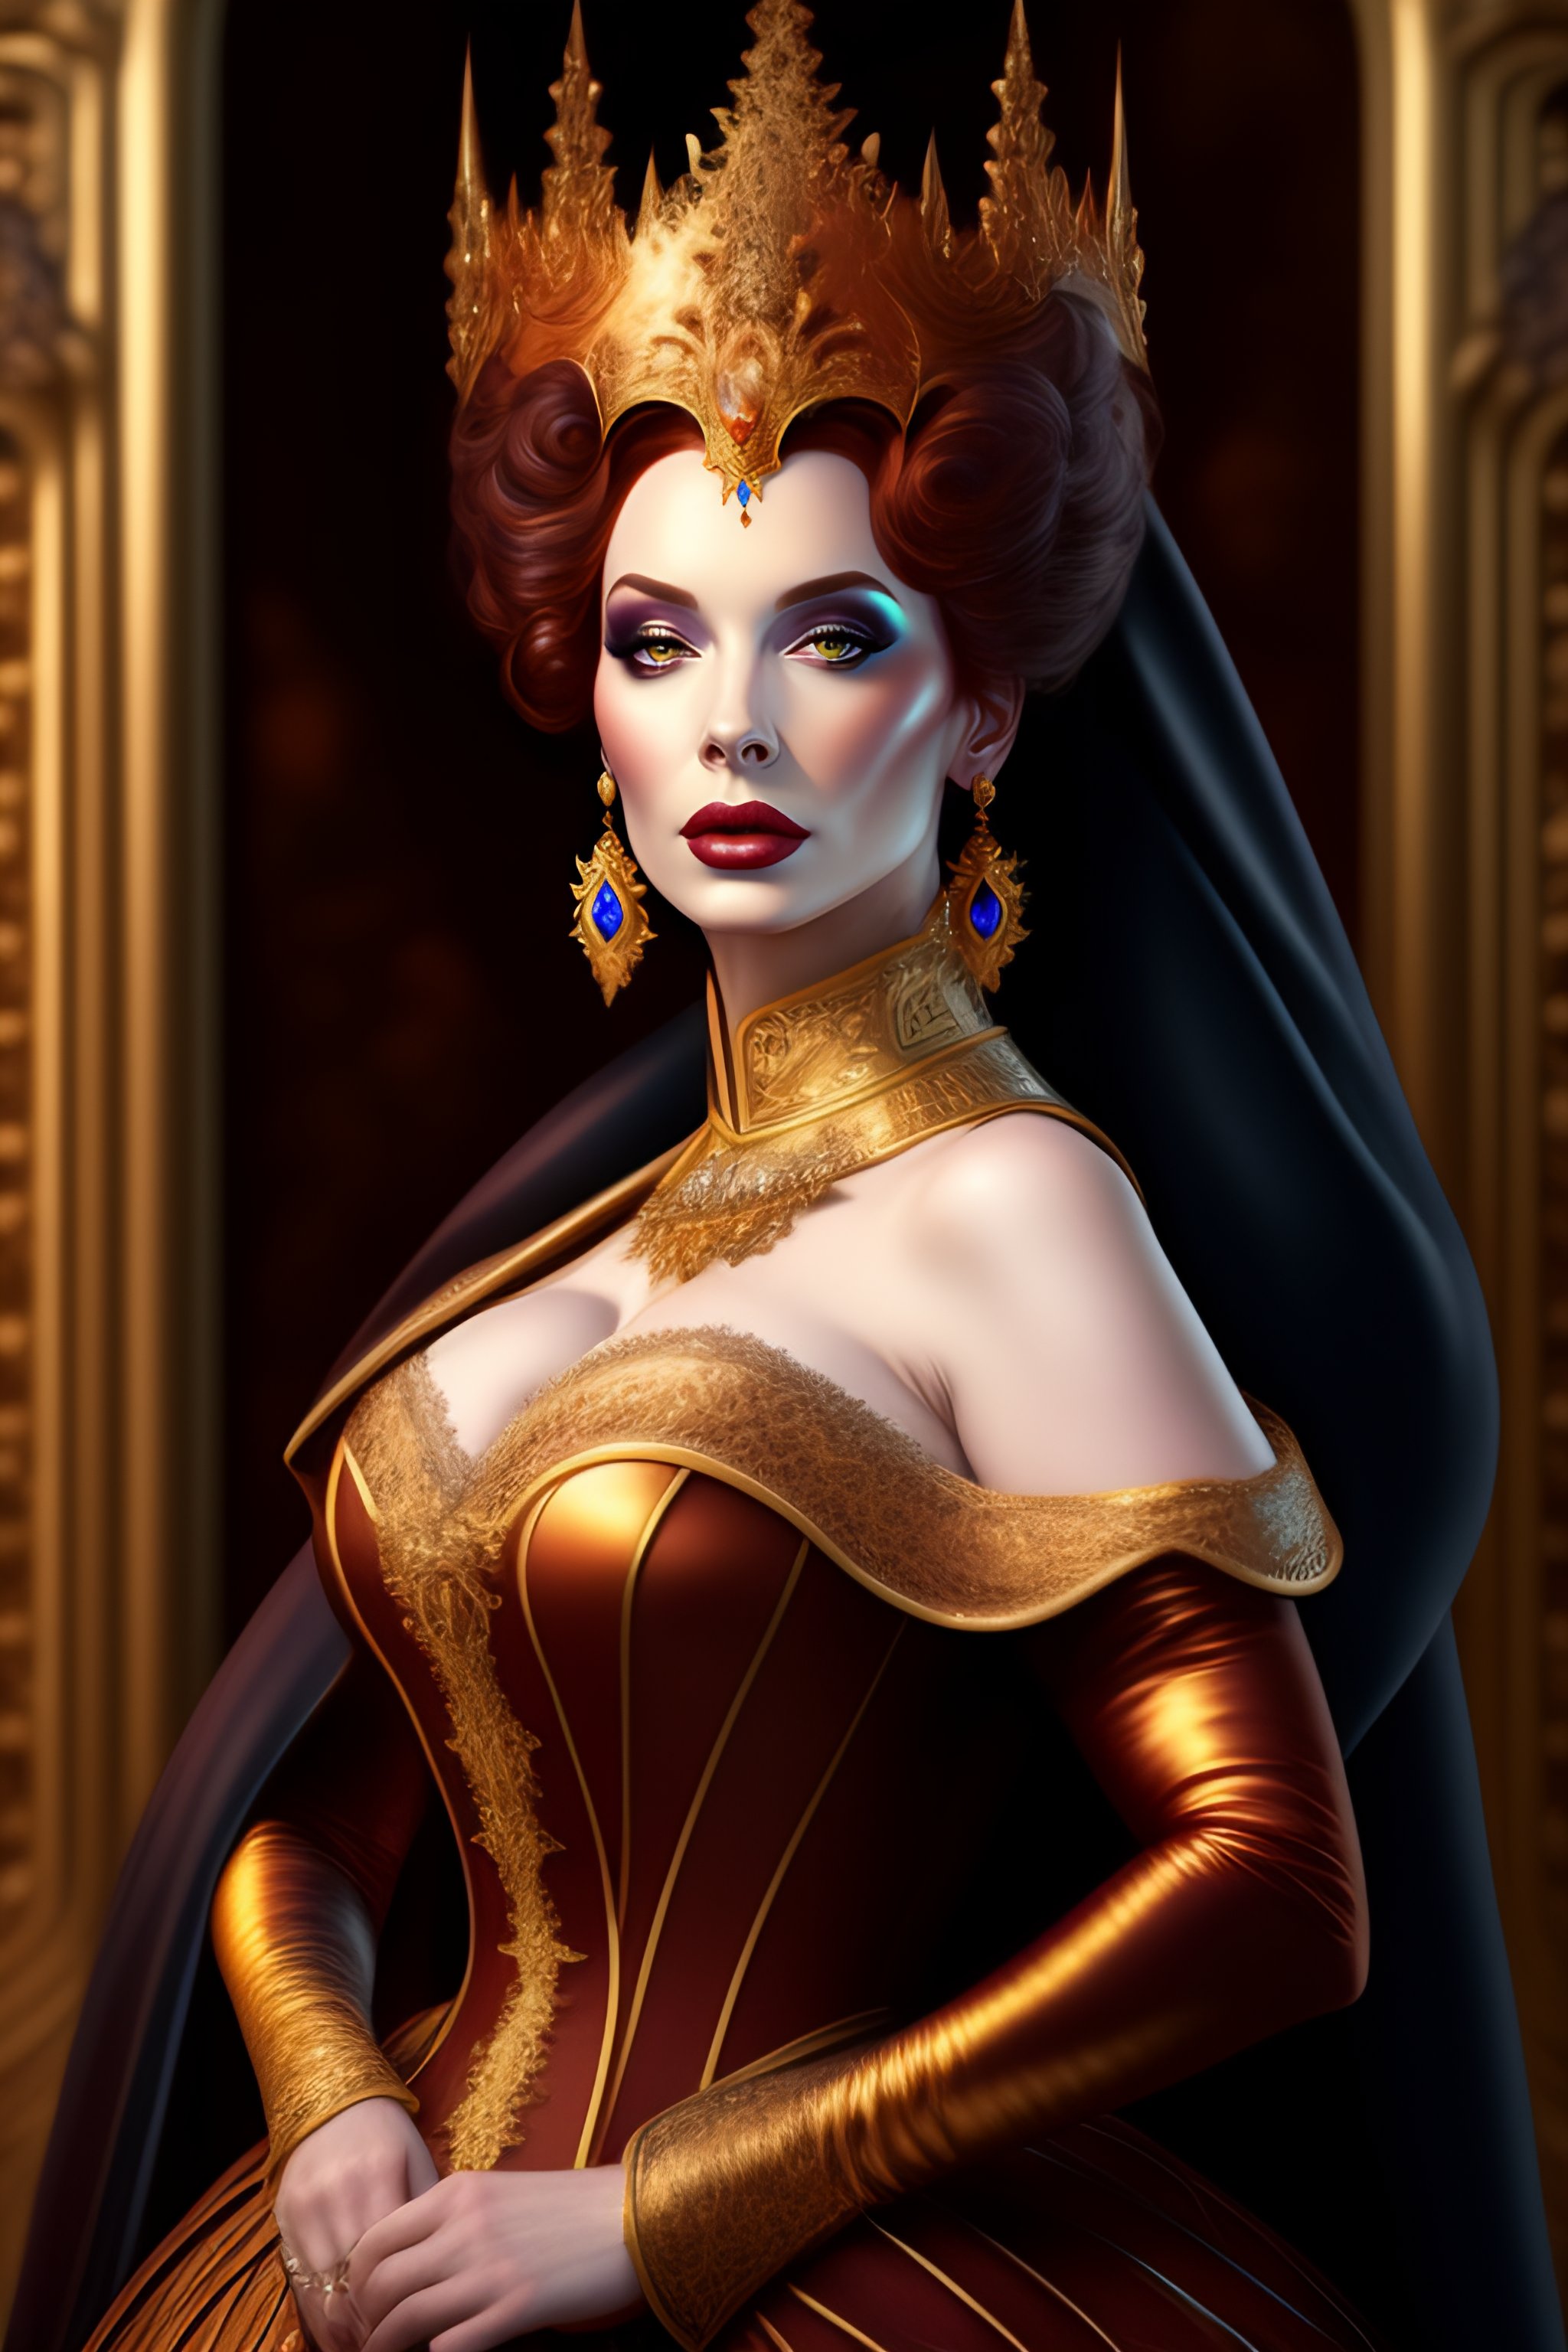 evil digital baroque painting, detailed, hendricks centered, Christina painting, highly queen, a Lexica as intricate, elegant, dressed dark -